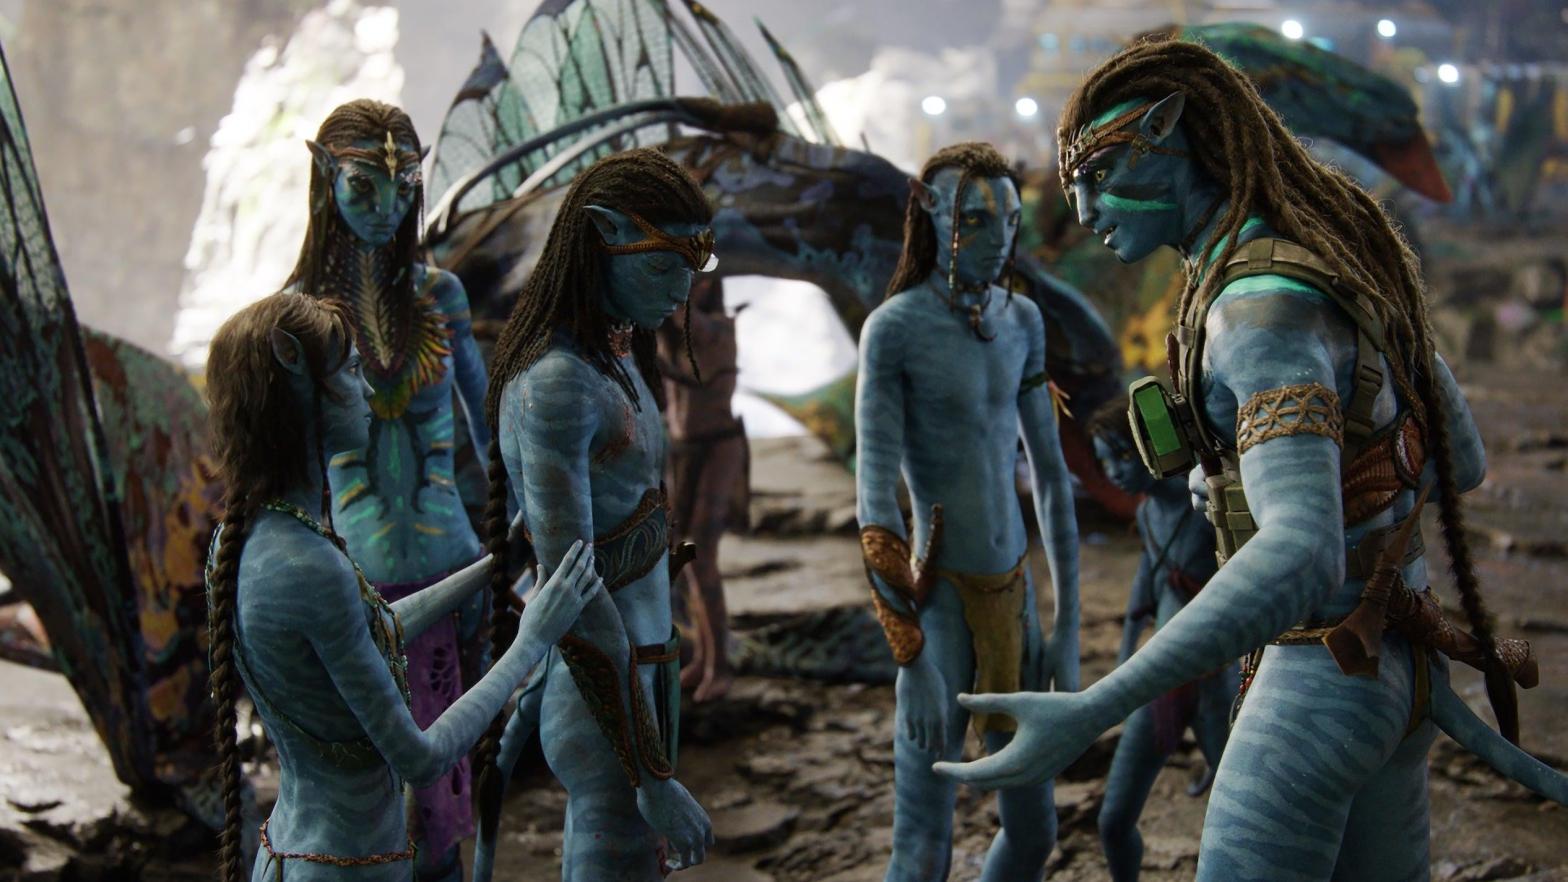 Kids, let me tell you the story of Avatar. (Image: Fox)